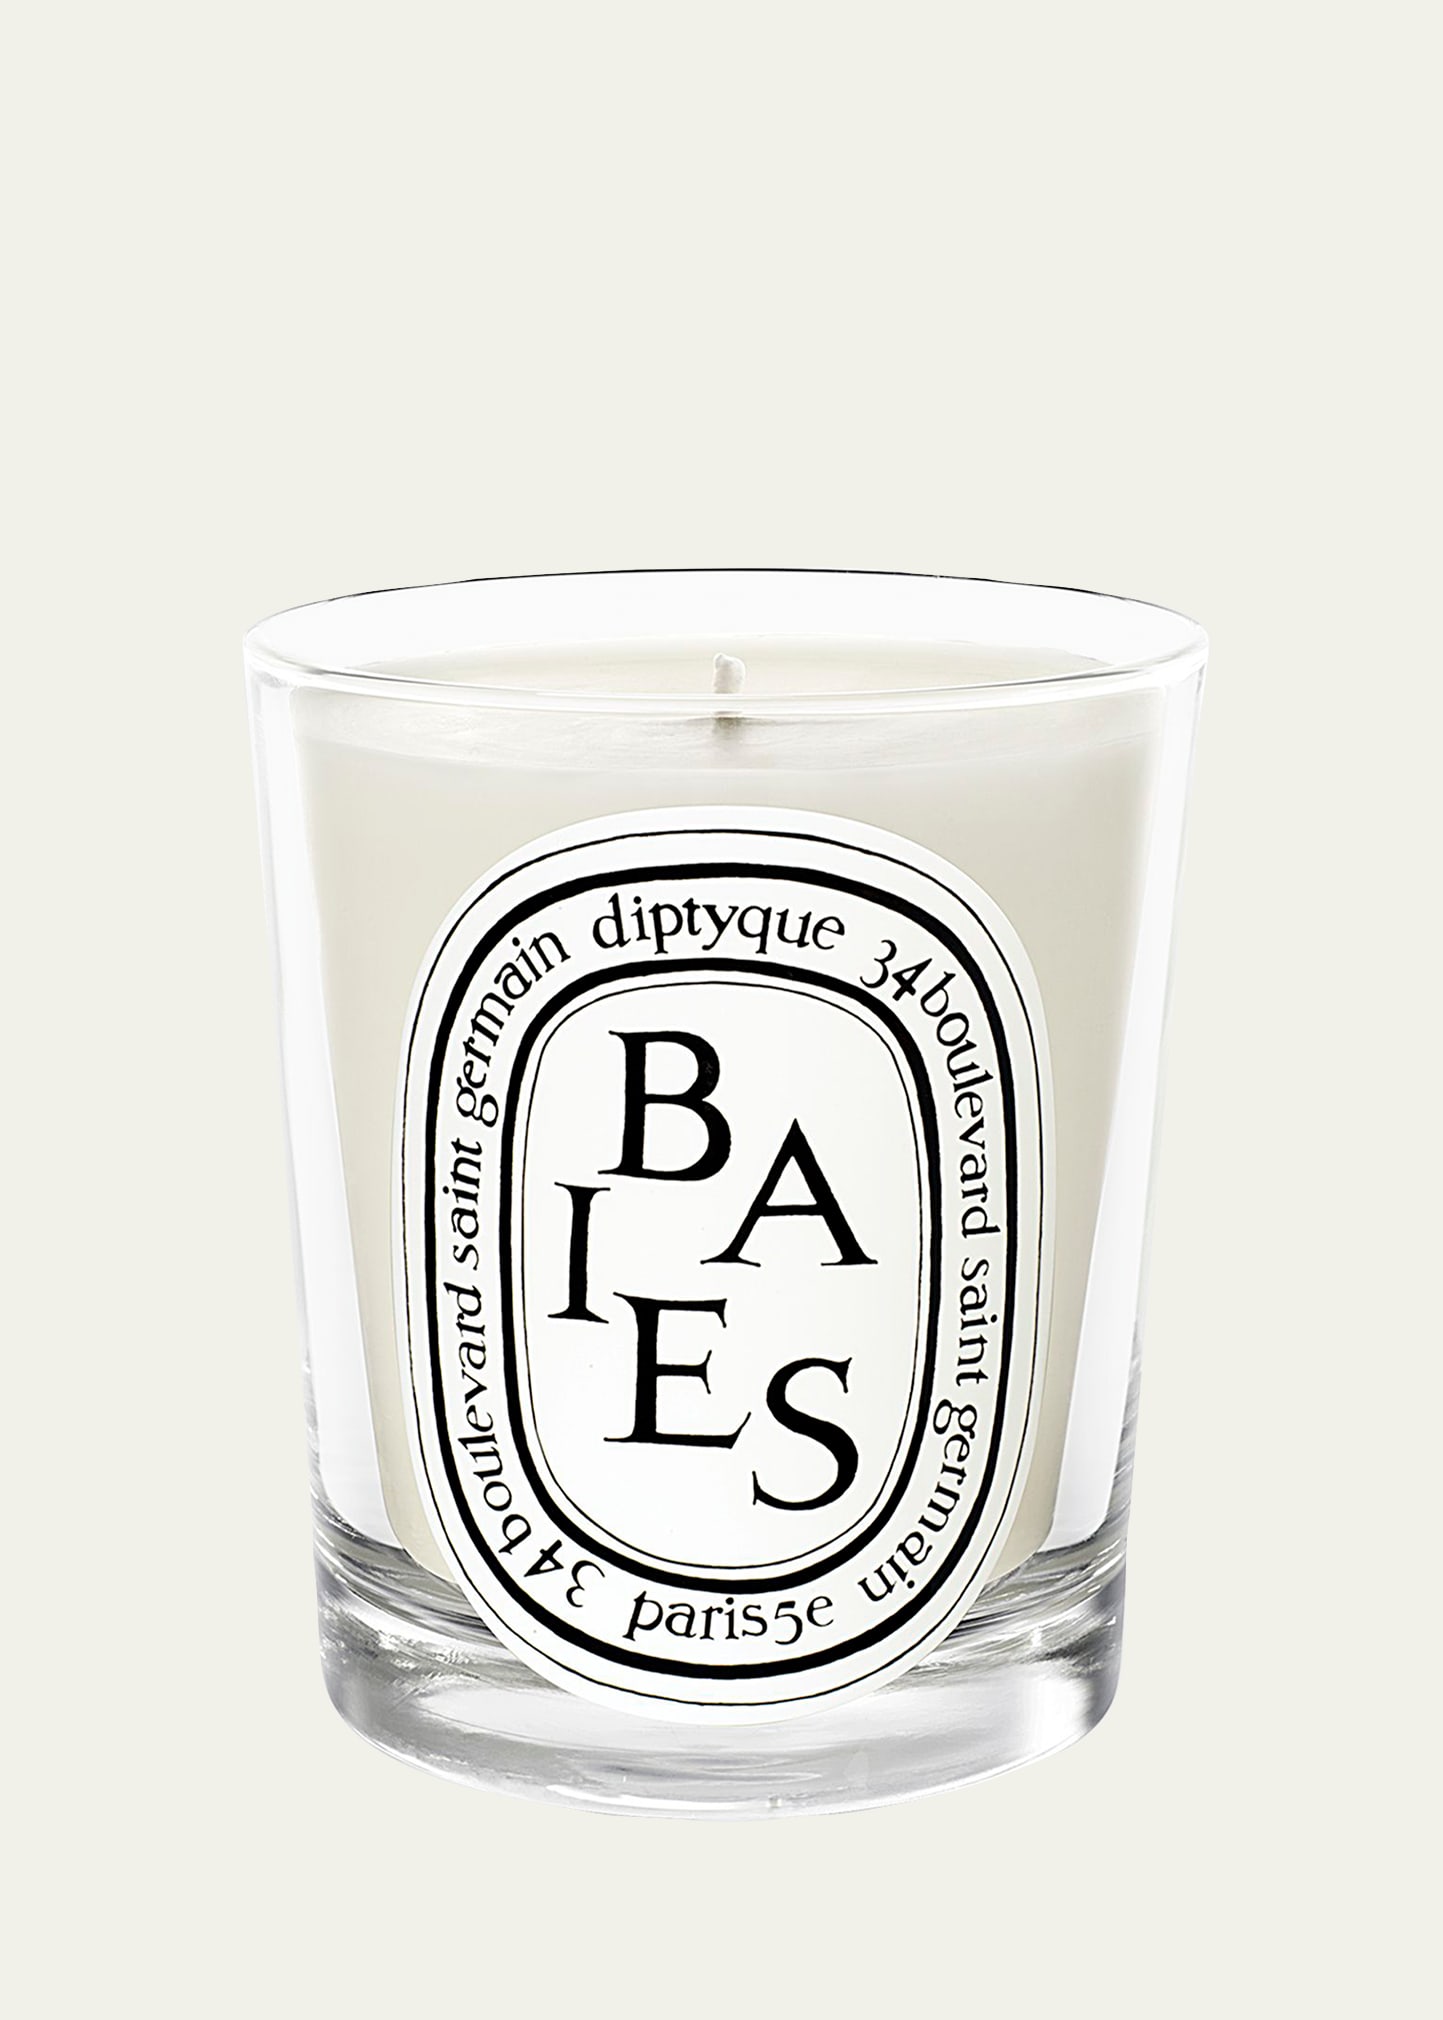 DIPTYQUE Baies (Berries) Scented Candle, 6.5 oz.